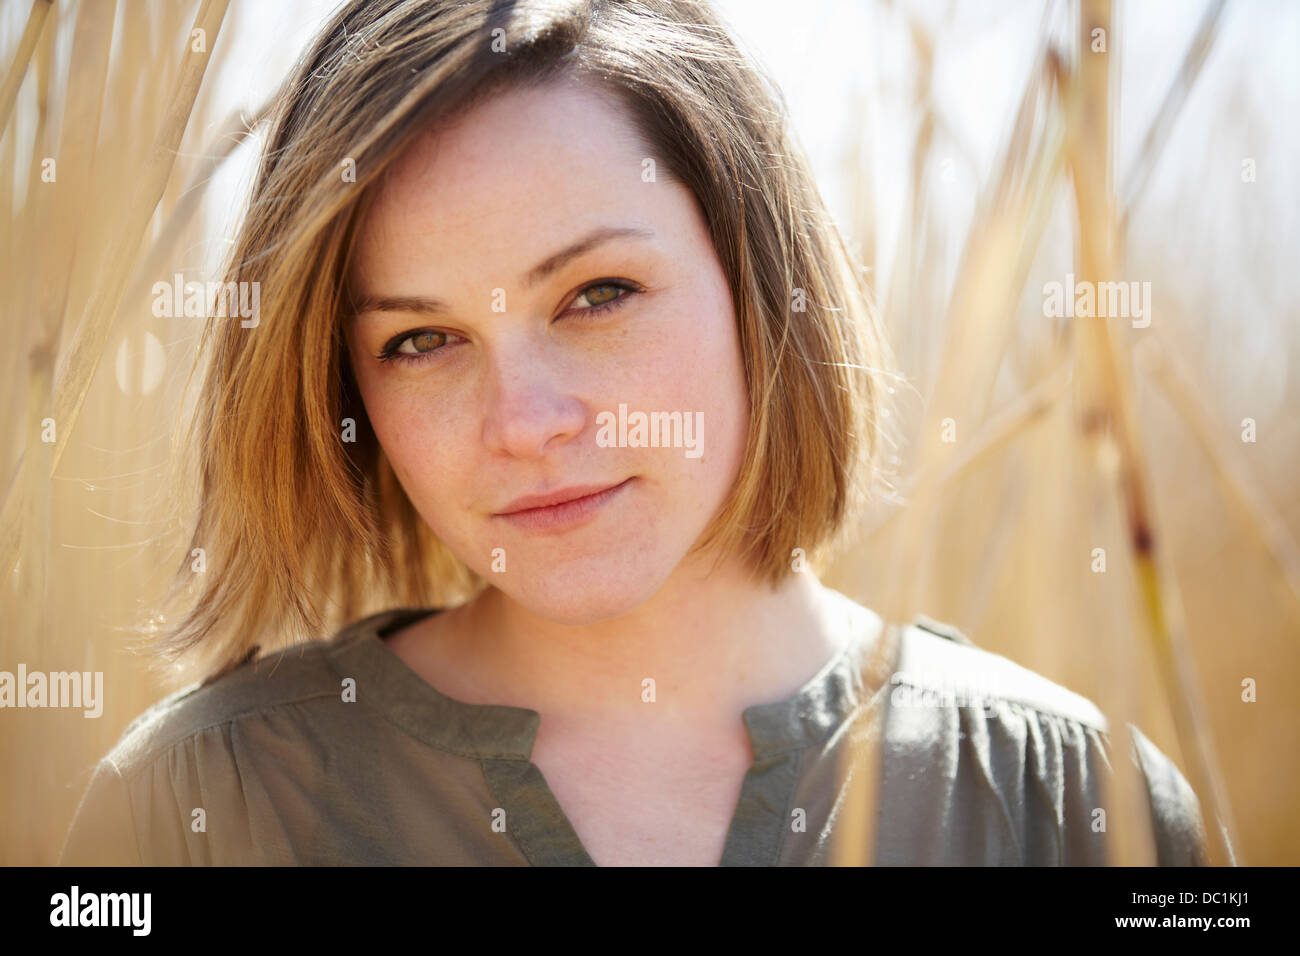 Close up portrait of young woman amongst reeds Stock Photo